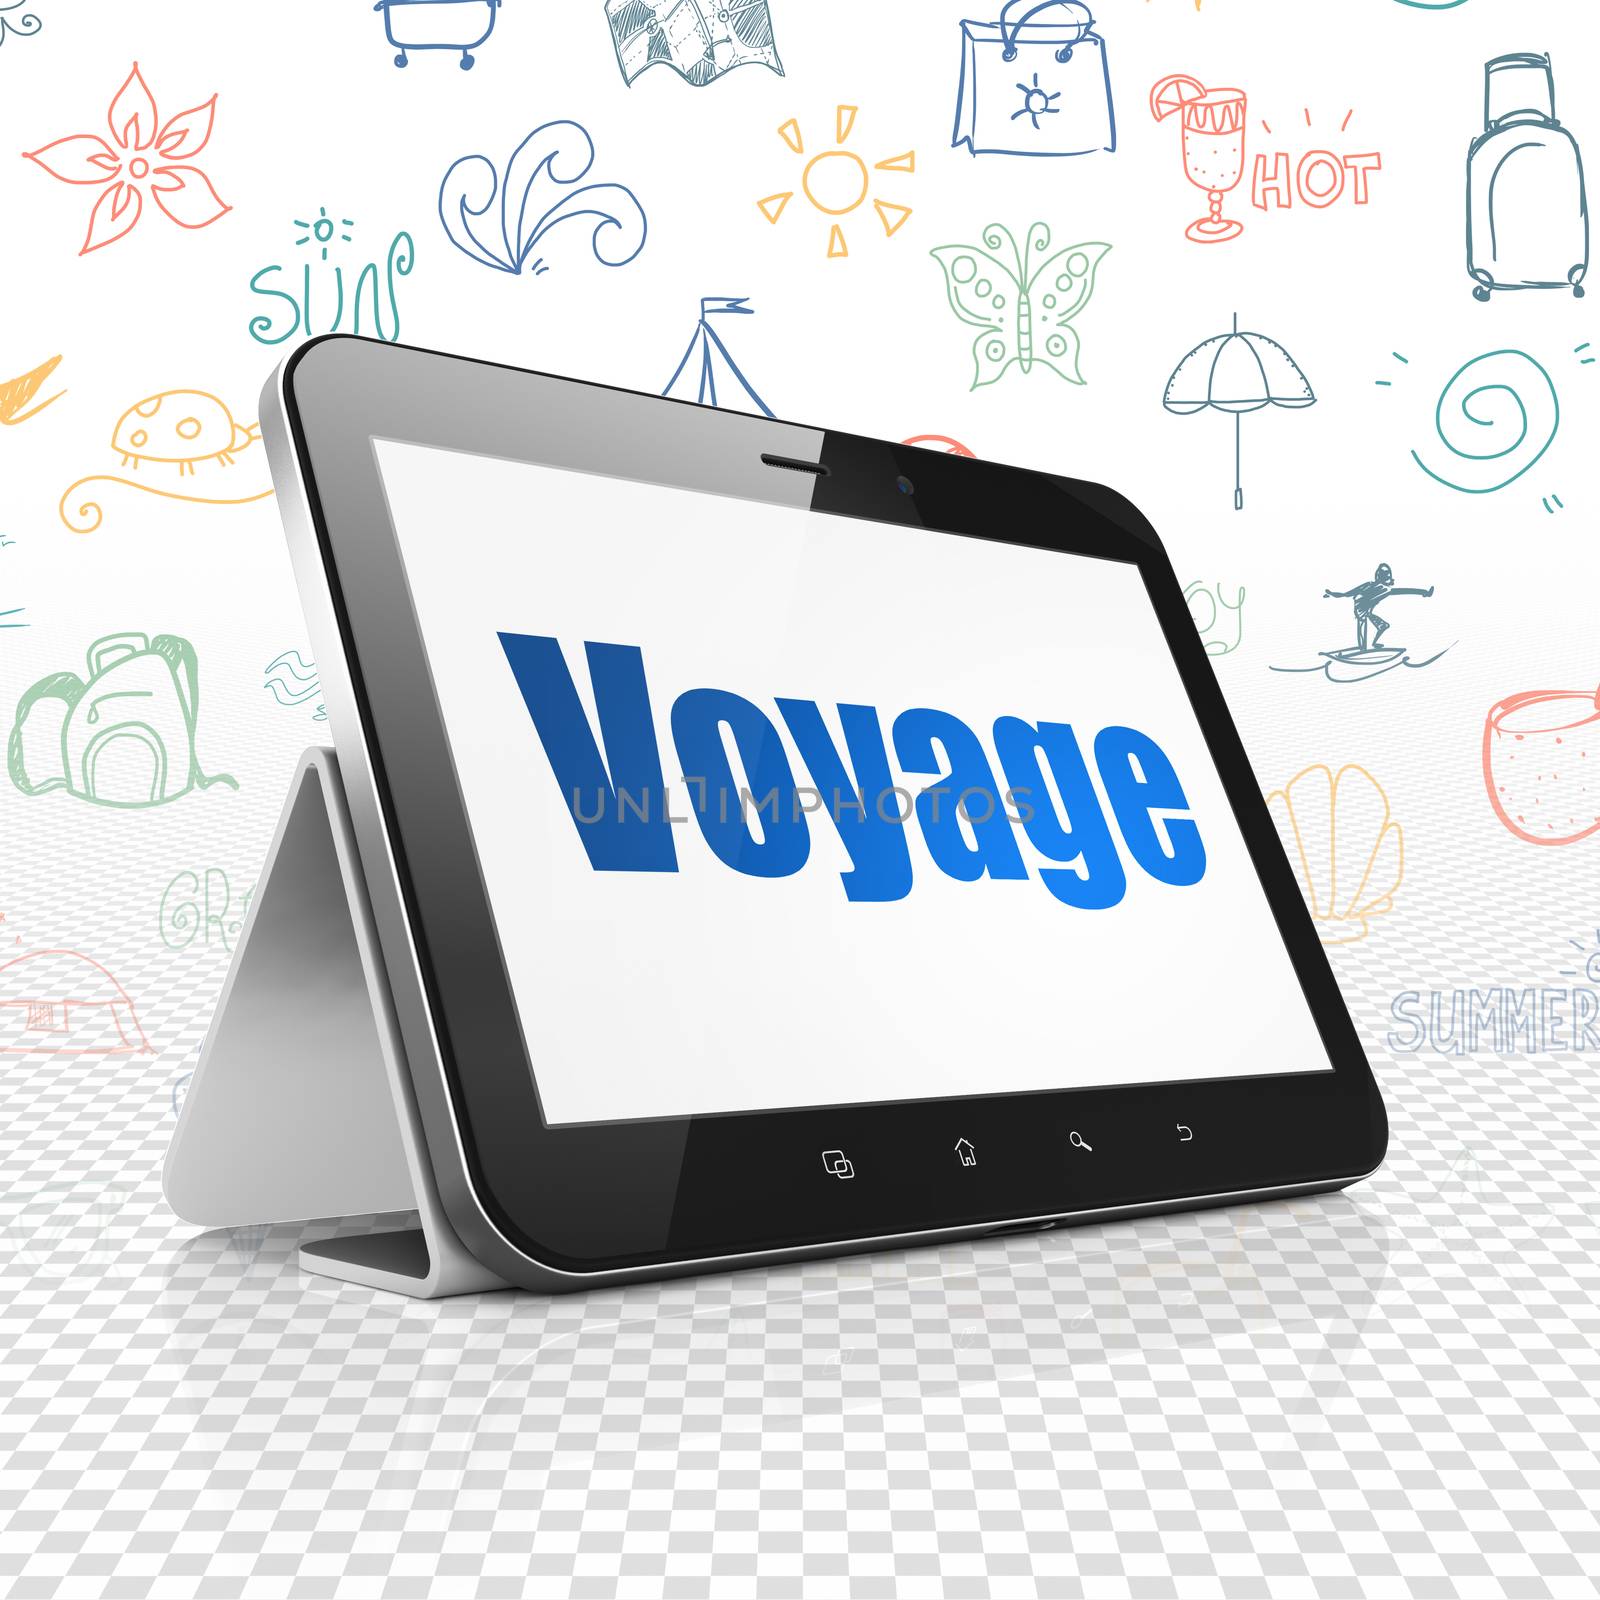 Tourism concept: Tablet Computer with  blue text Voyage on display,  Hand Drawn Vacation Icons background, 3D rendering